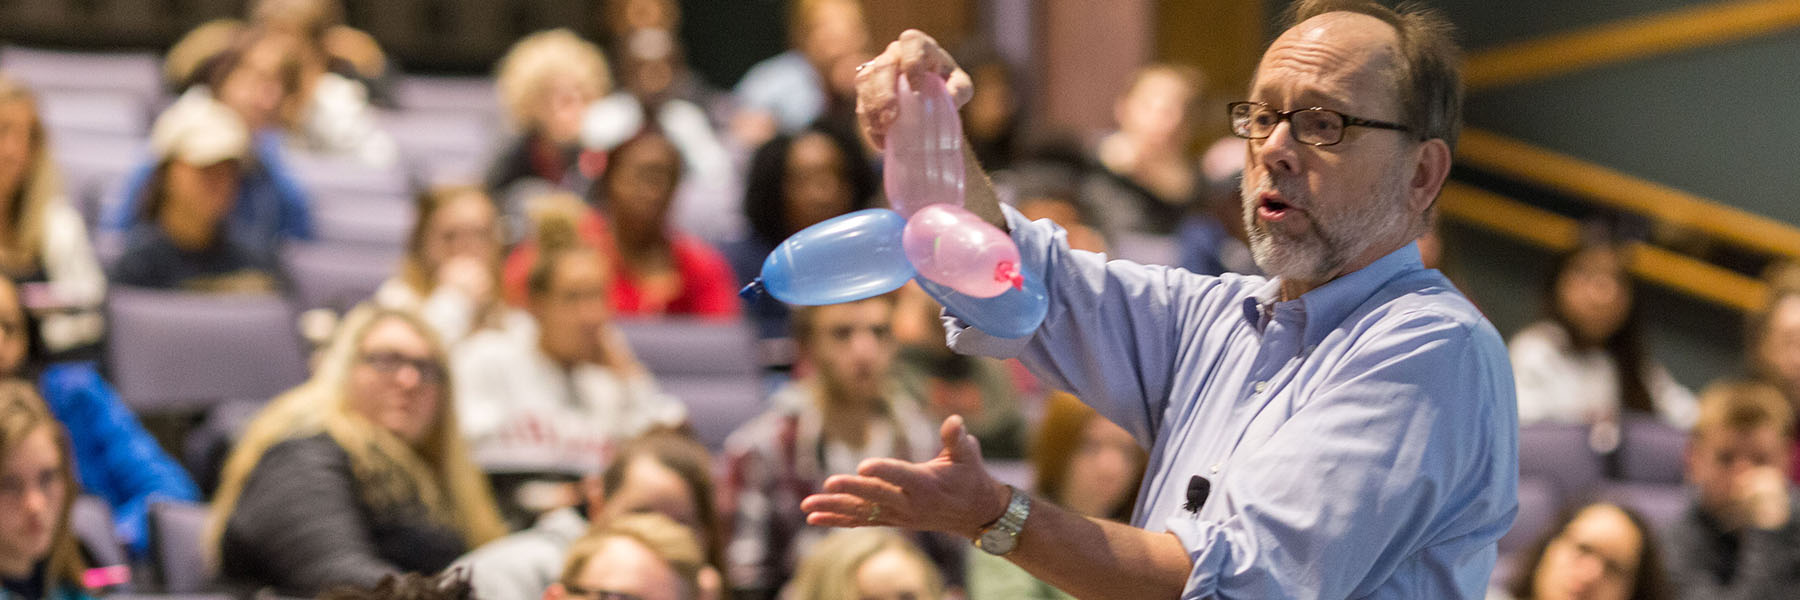 Professor holding balloons for chemistry experiment in front of auditorium with students